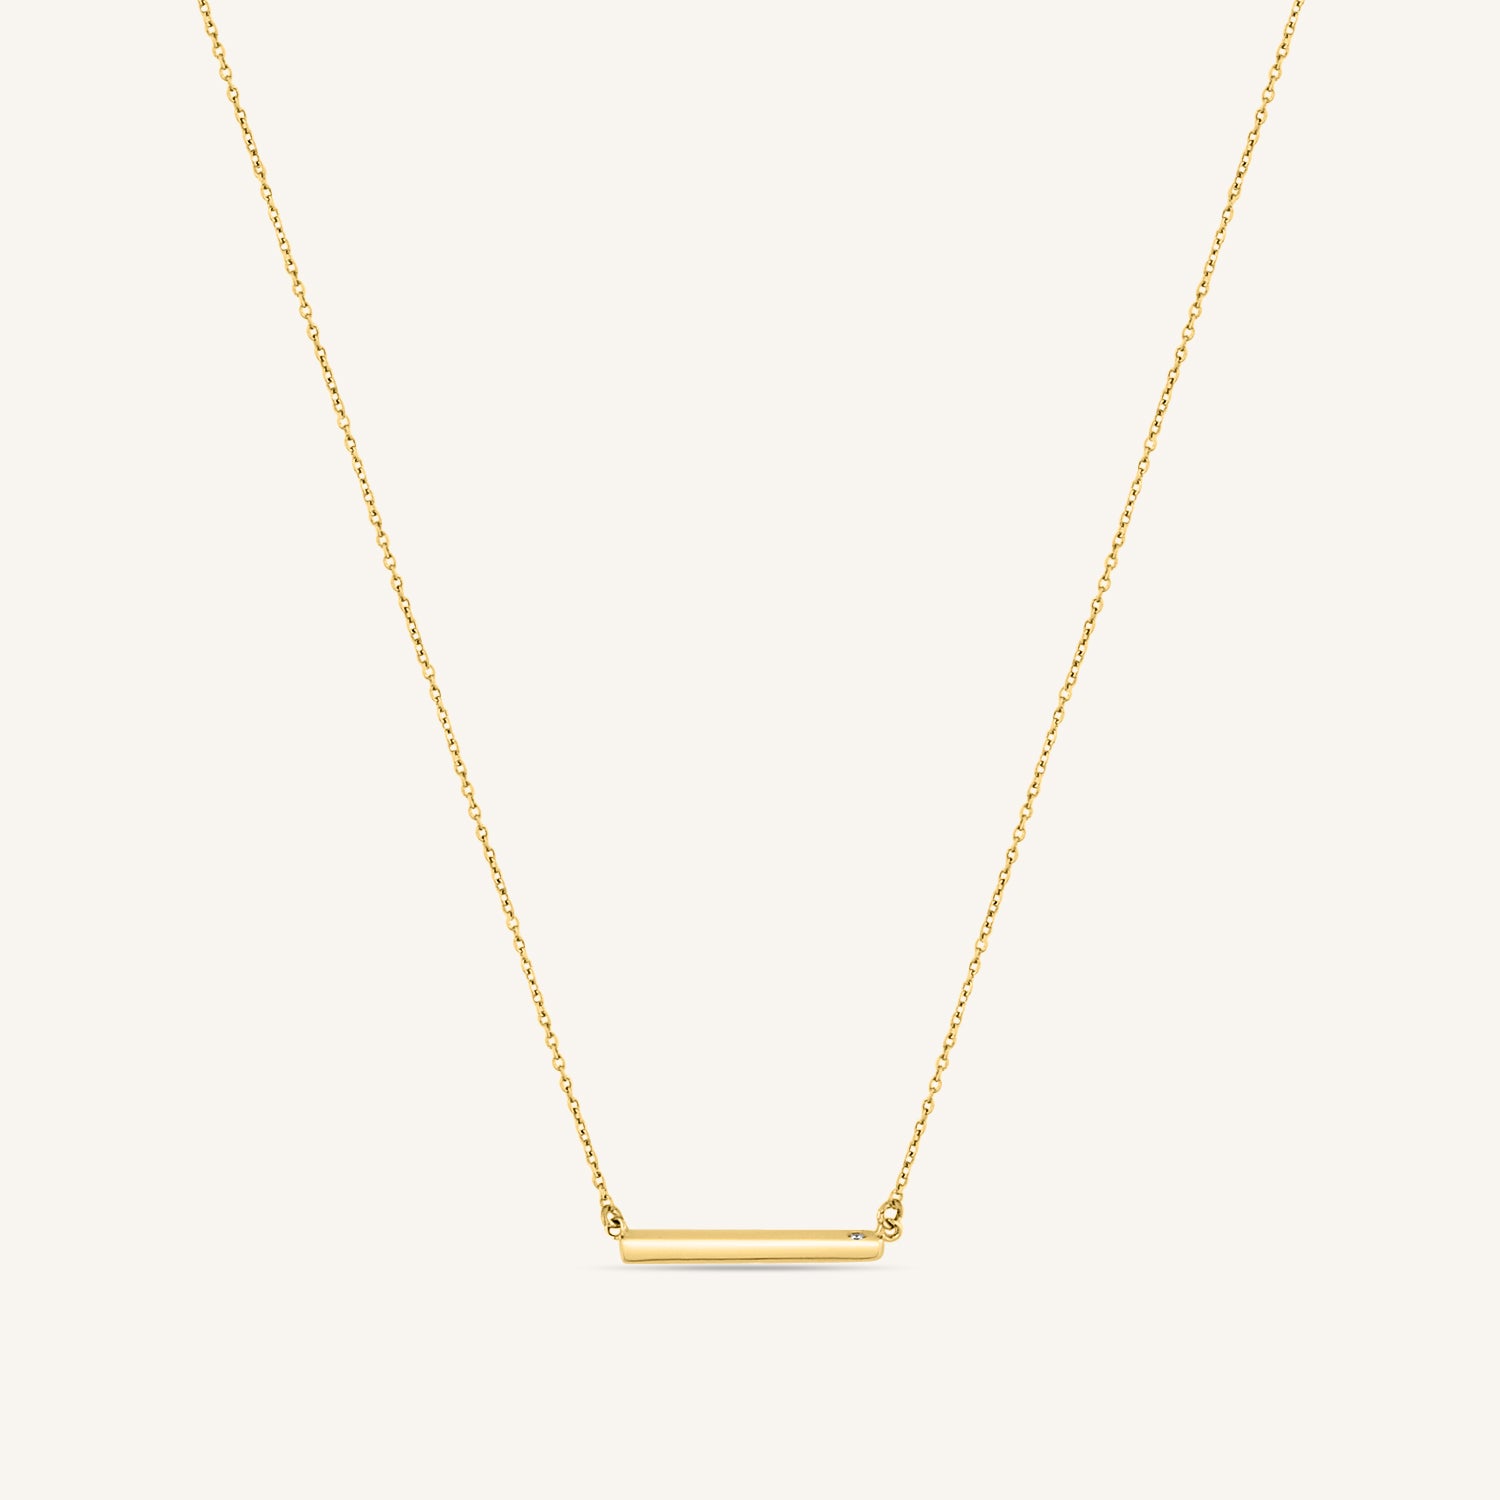 Women's Necklaces - Summer Esther Adorned